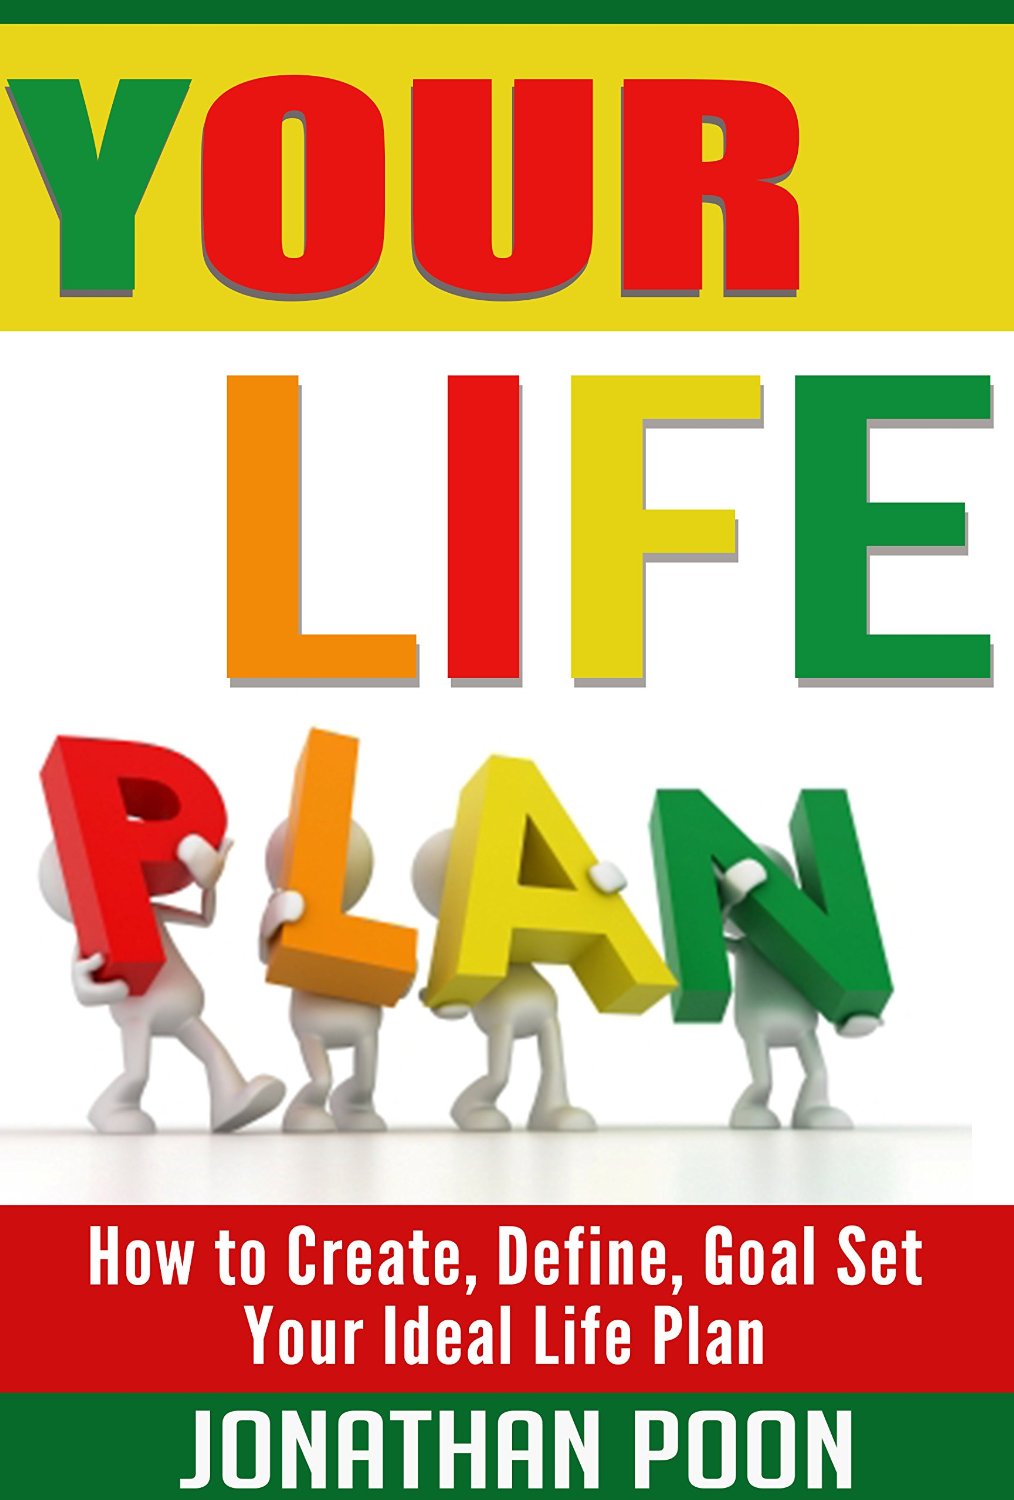 FREE: Your Life Plan by Jonathan Poon